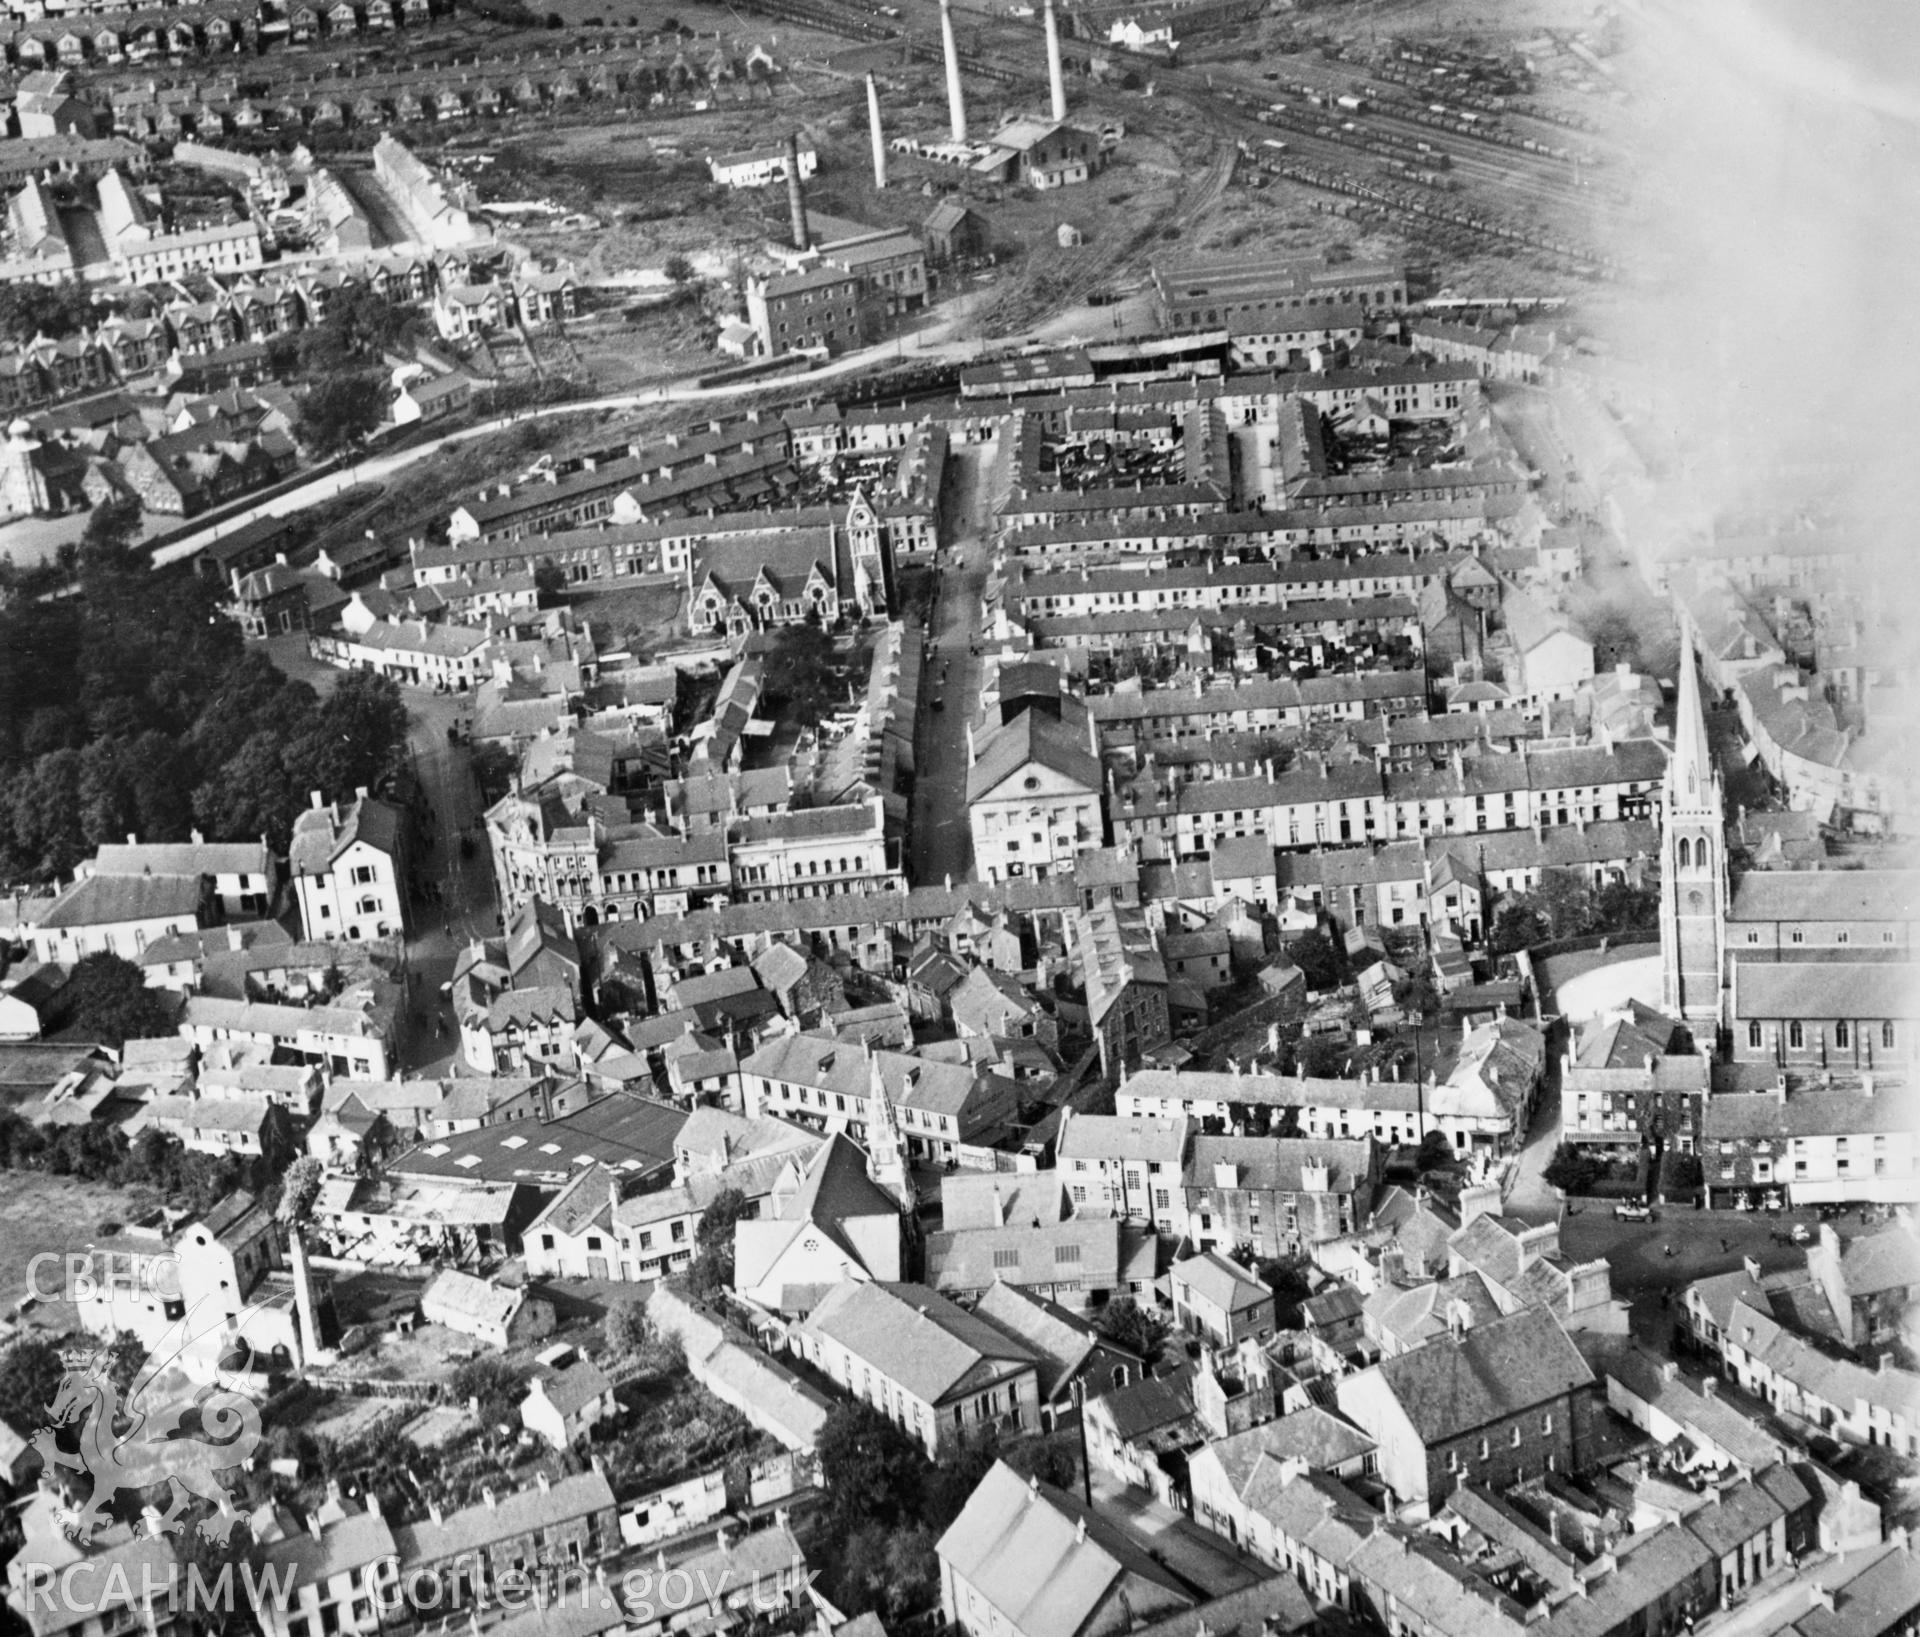 View of Aberdare showing theatre. Oblique aerial photograph, 5?x4? BW glass plate.